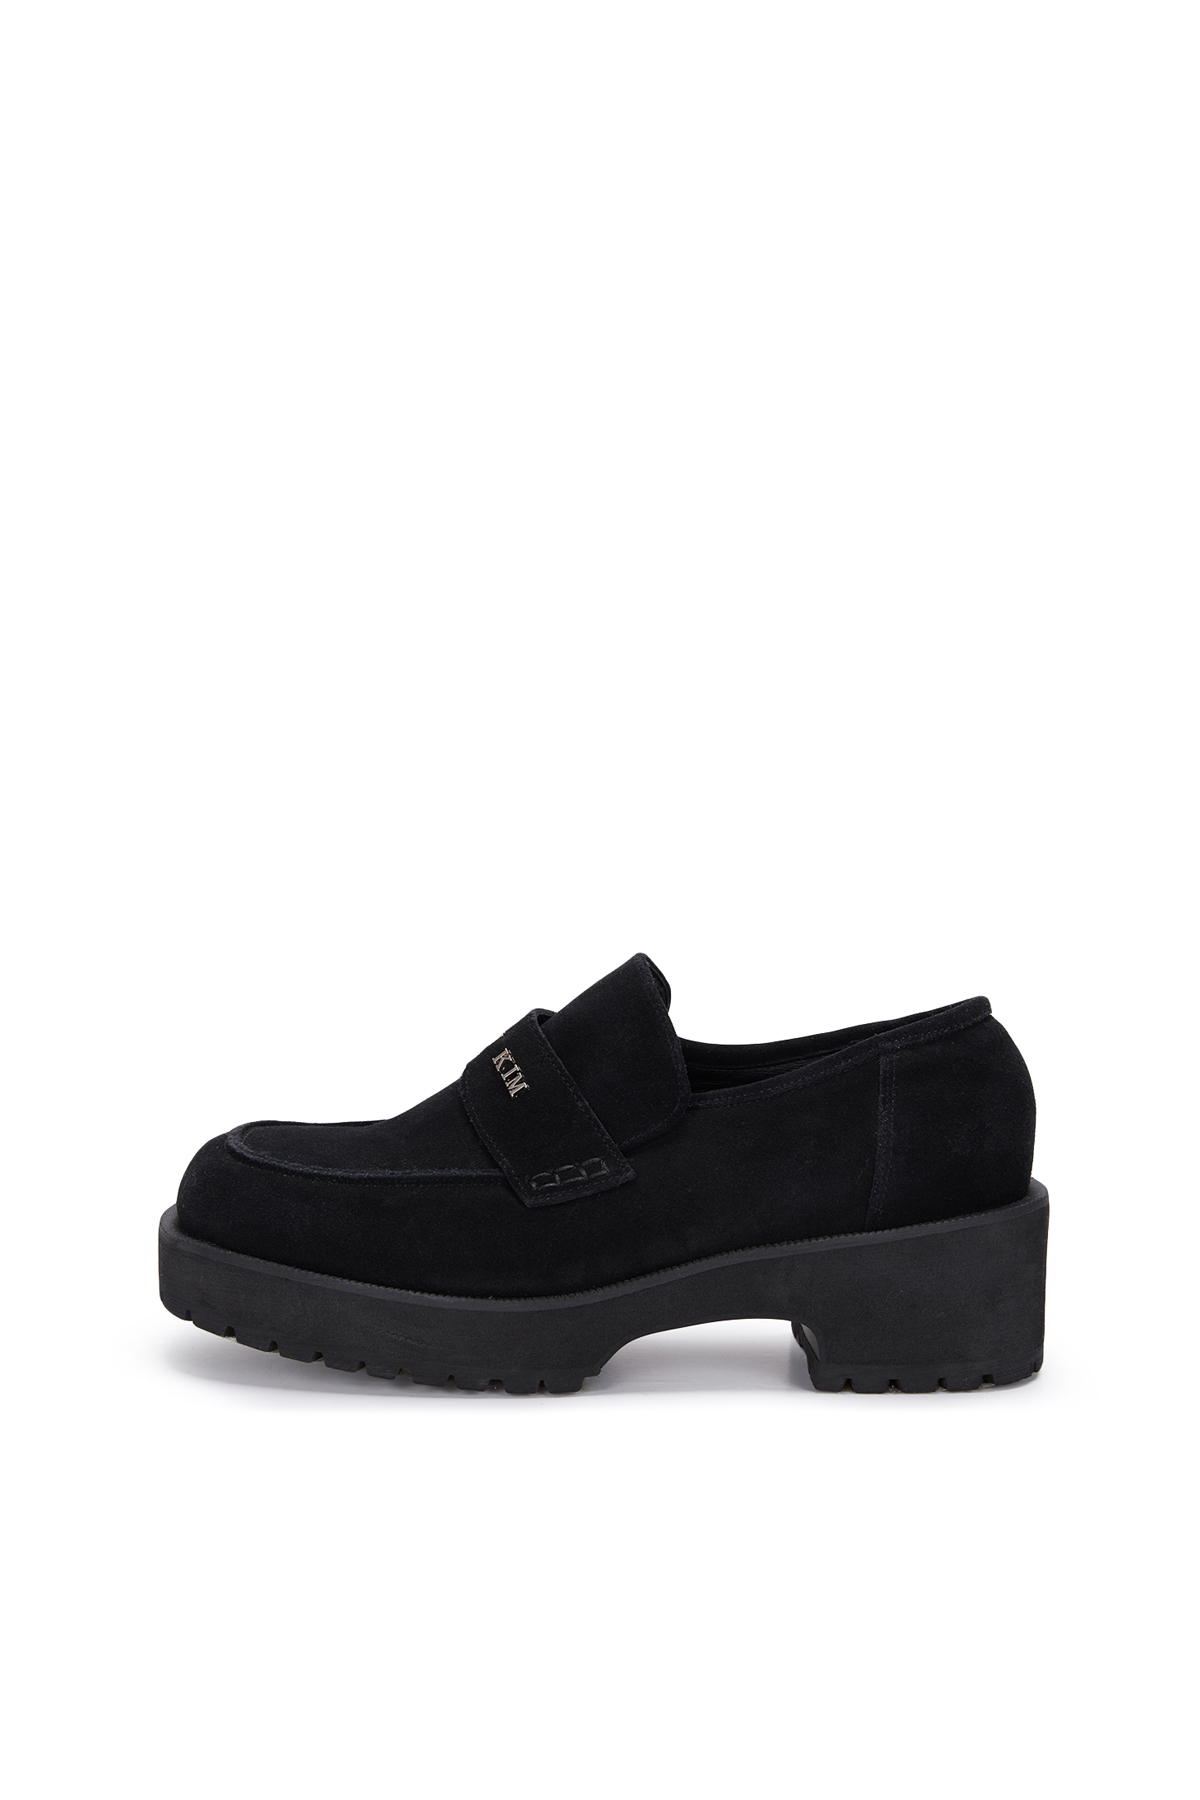 MATIN SQUARE SUEDE LOAFER IN BLACK